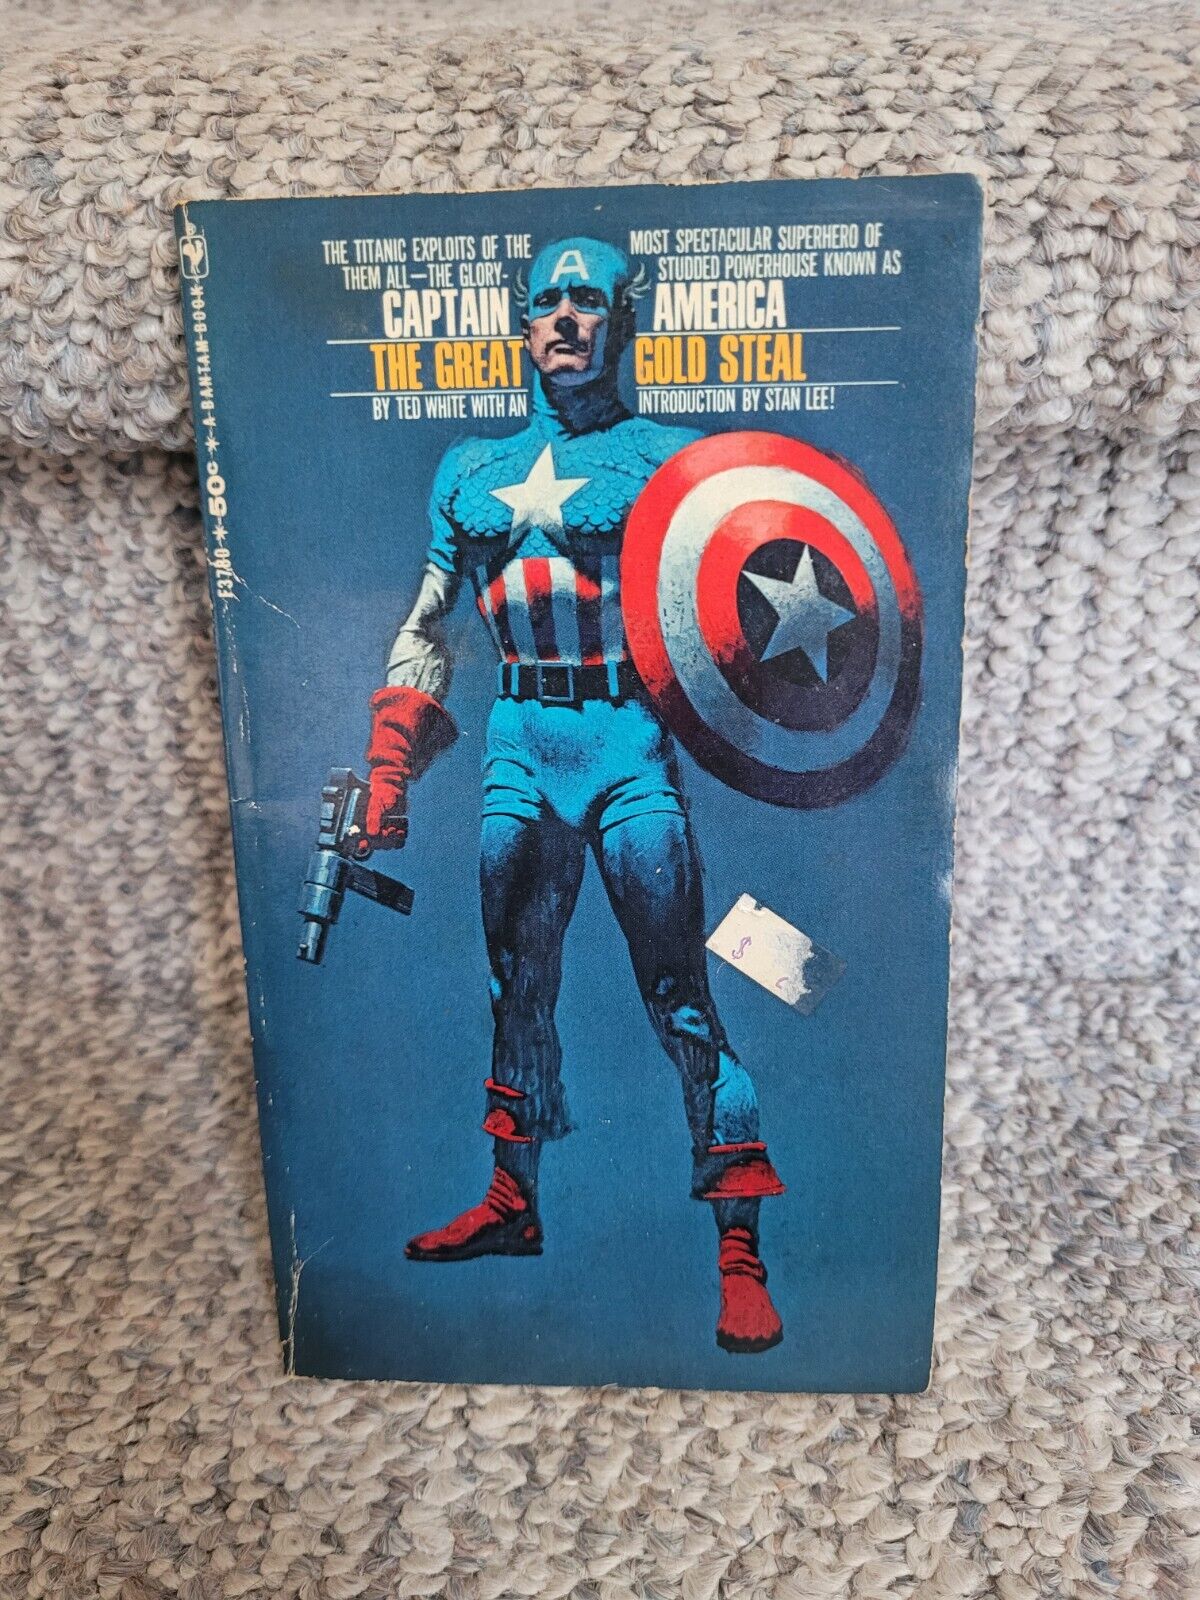 CAPTAIN AMERICA The Great Gold Steal PAPERBACK Bantam Books 1968 1st Ed Stan Lee